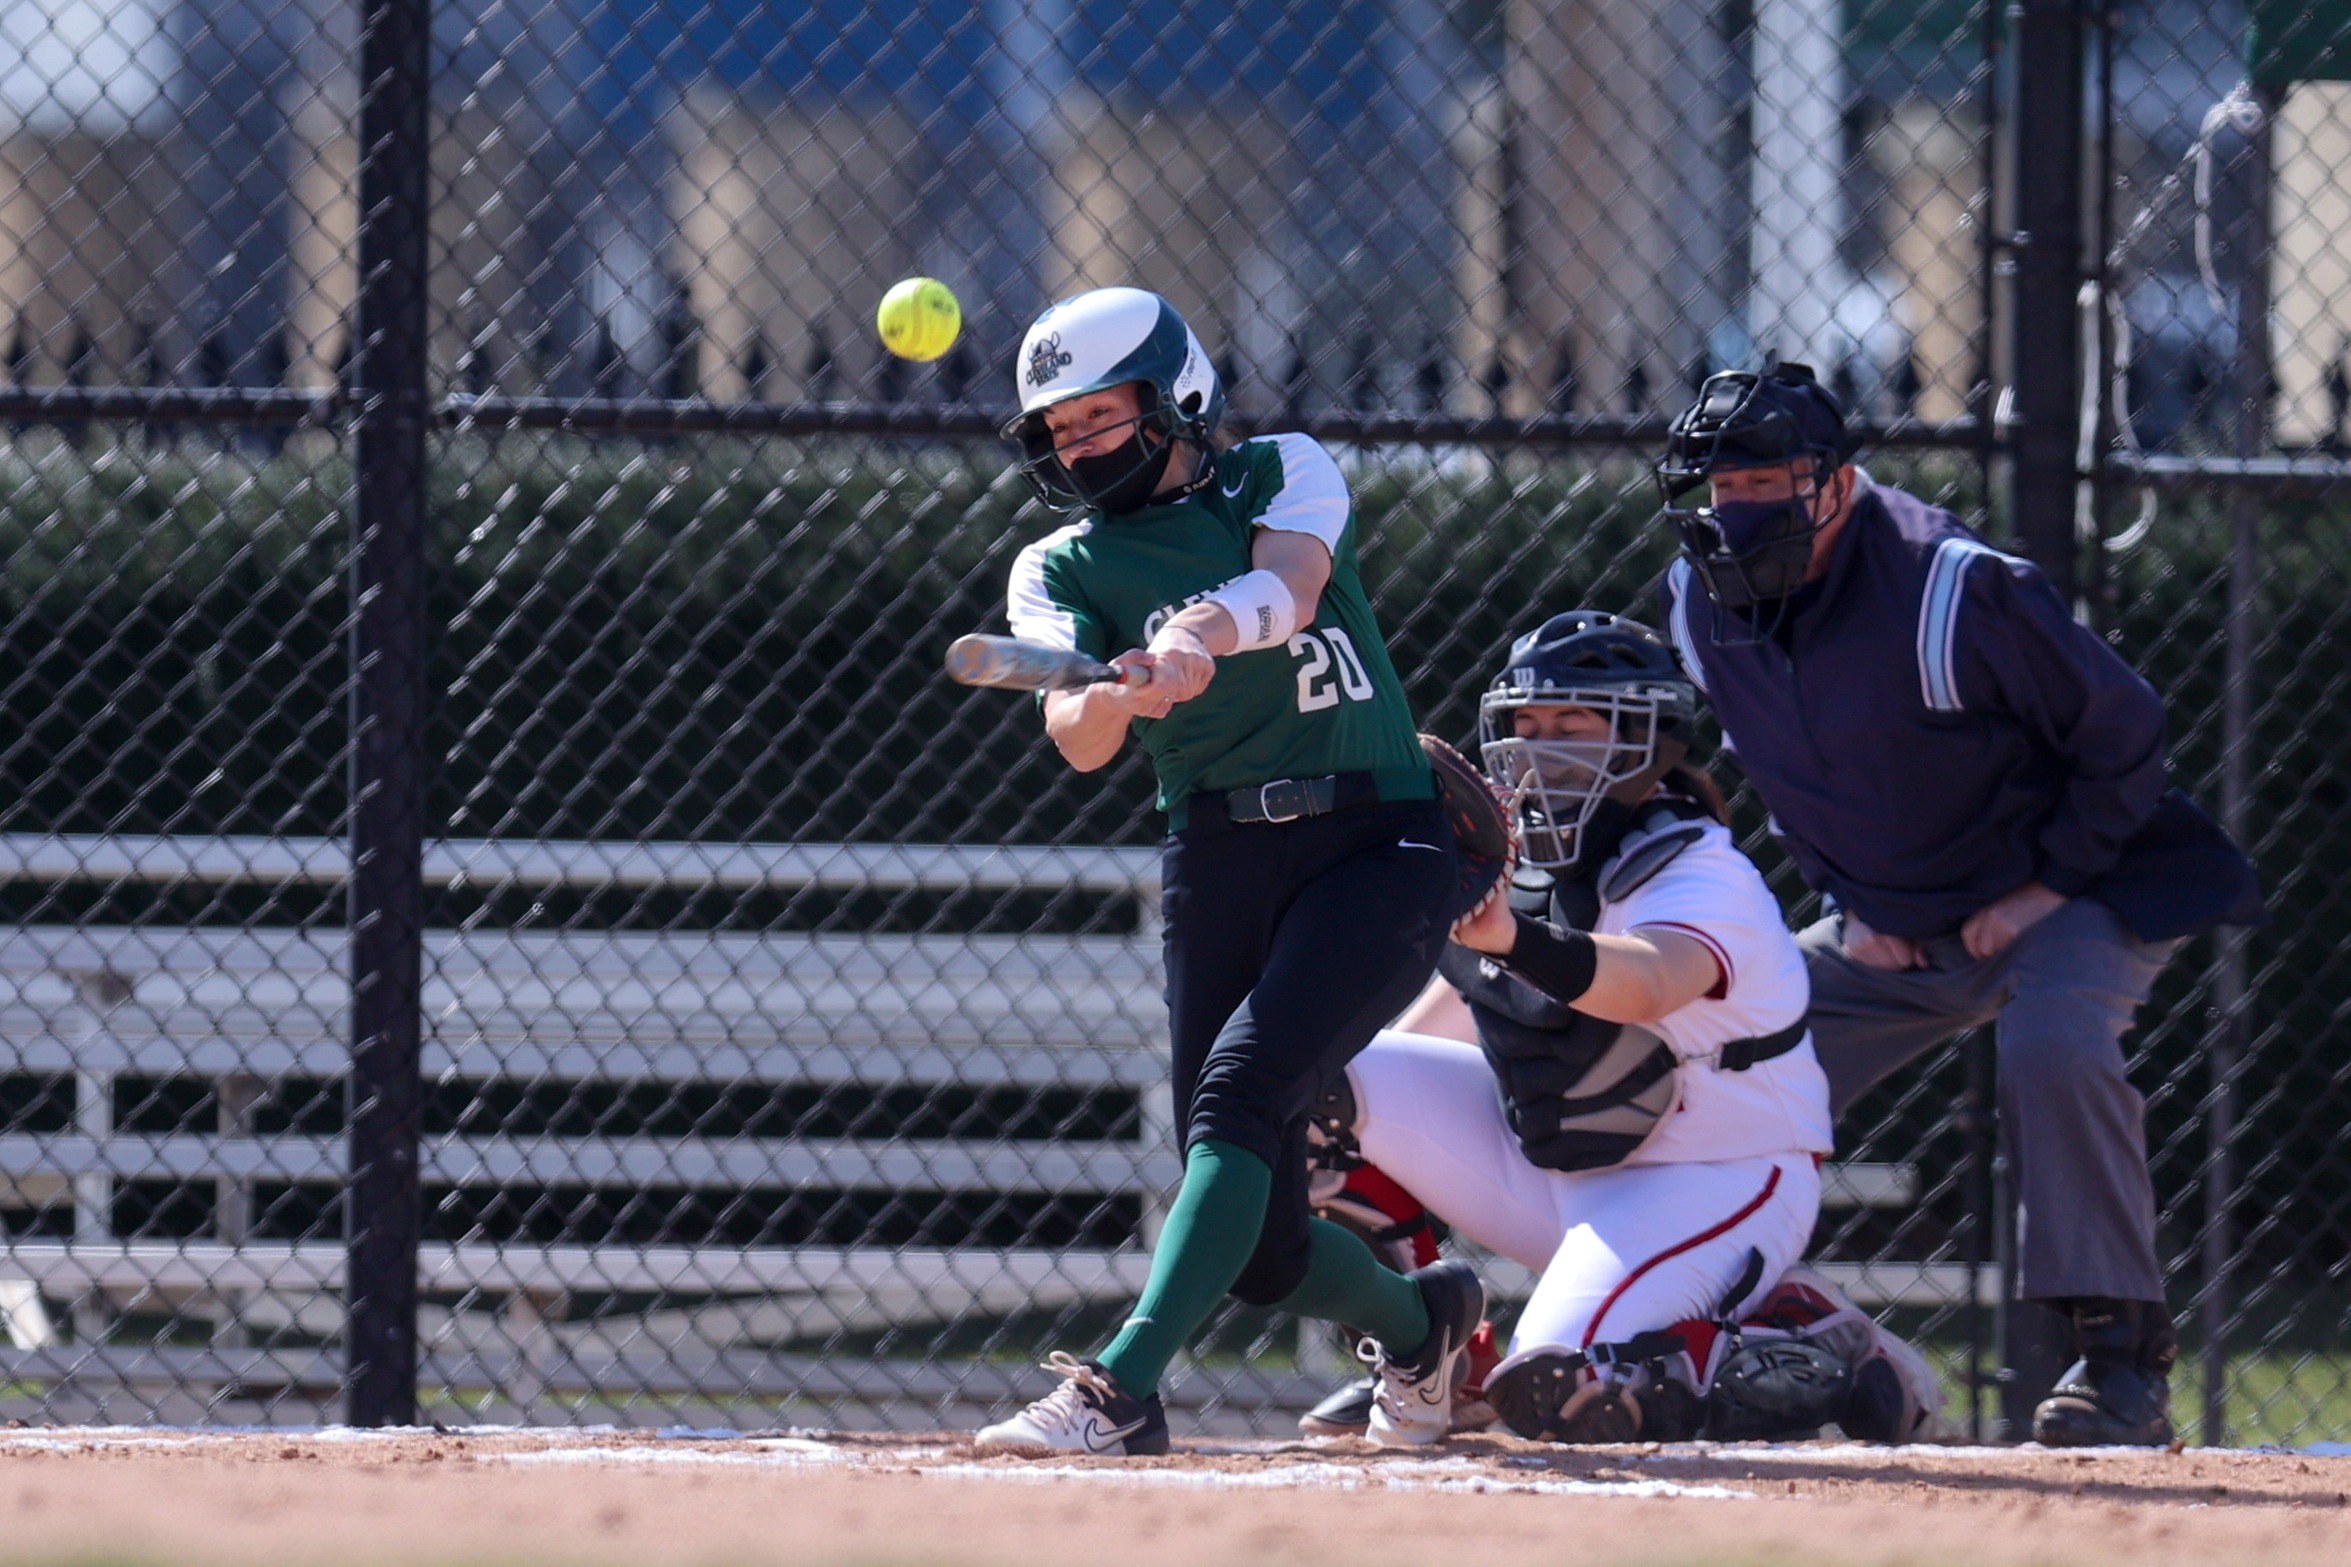 Softball tied for first in HL after opening-weekend sweep of IUPUI